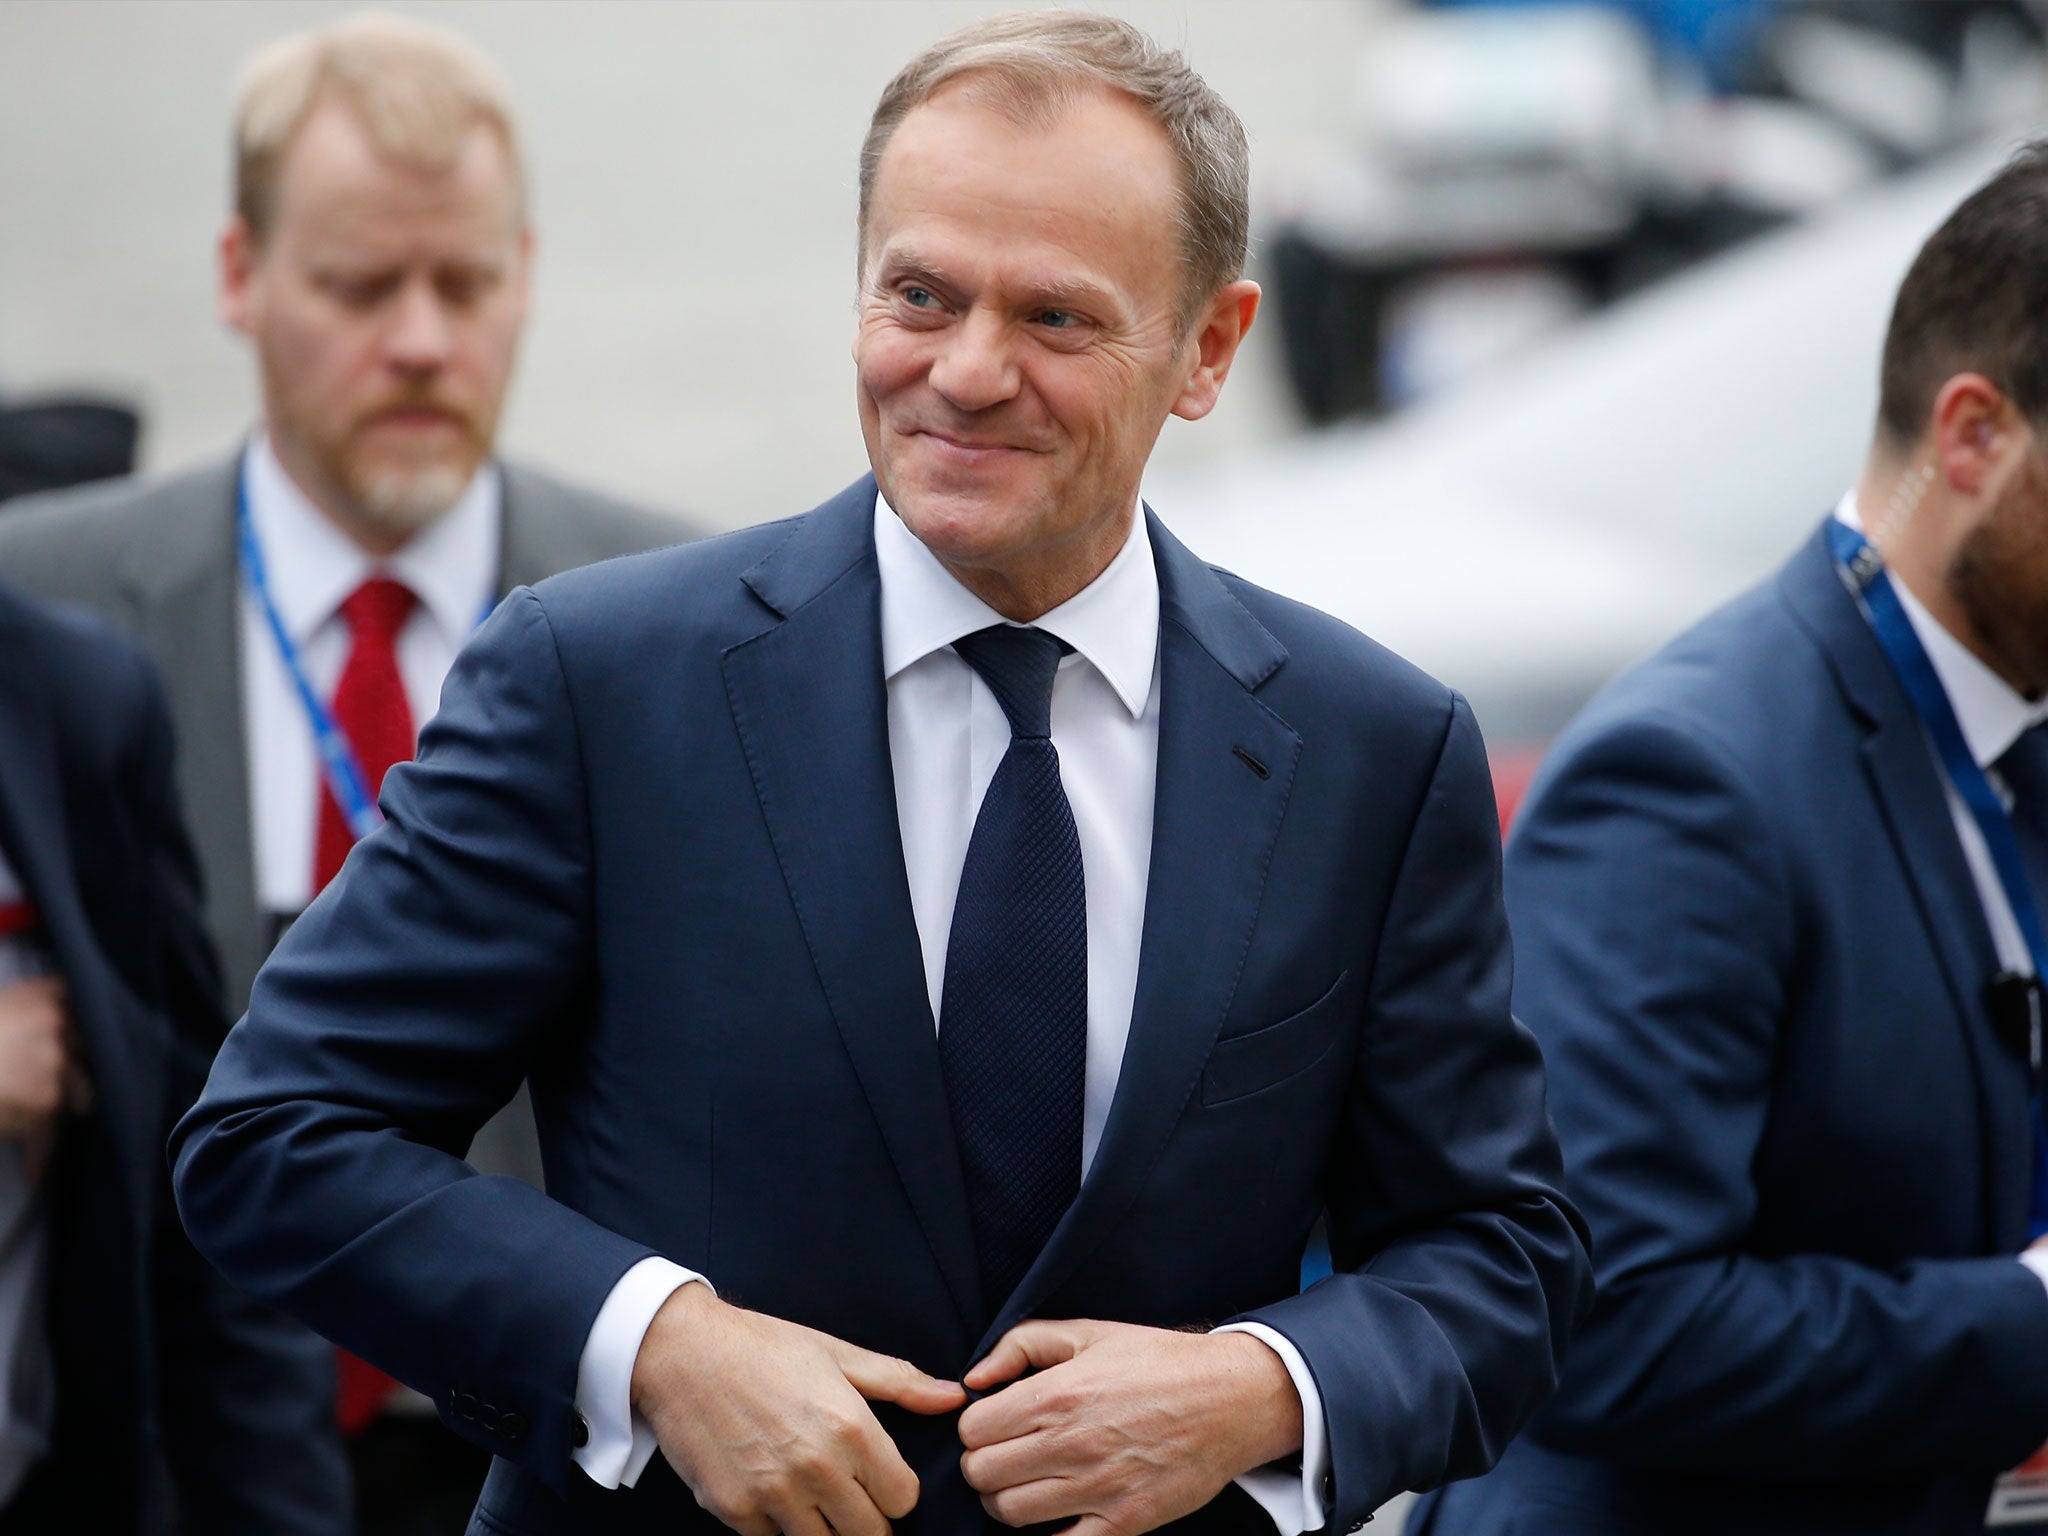 EU Council President Donald Tusk in Brussels on 9 March